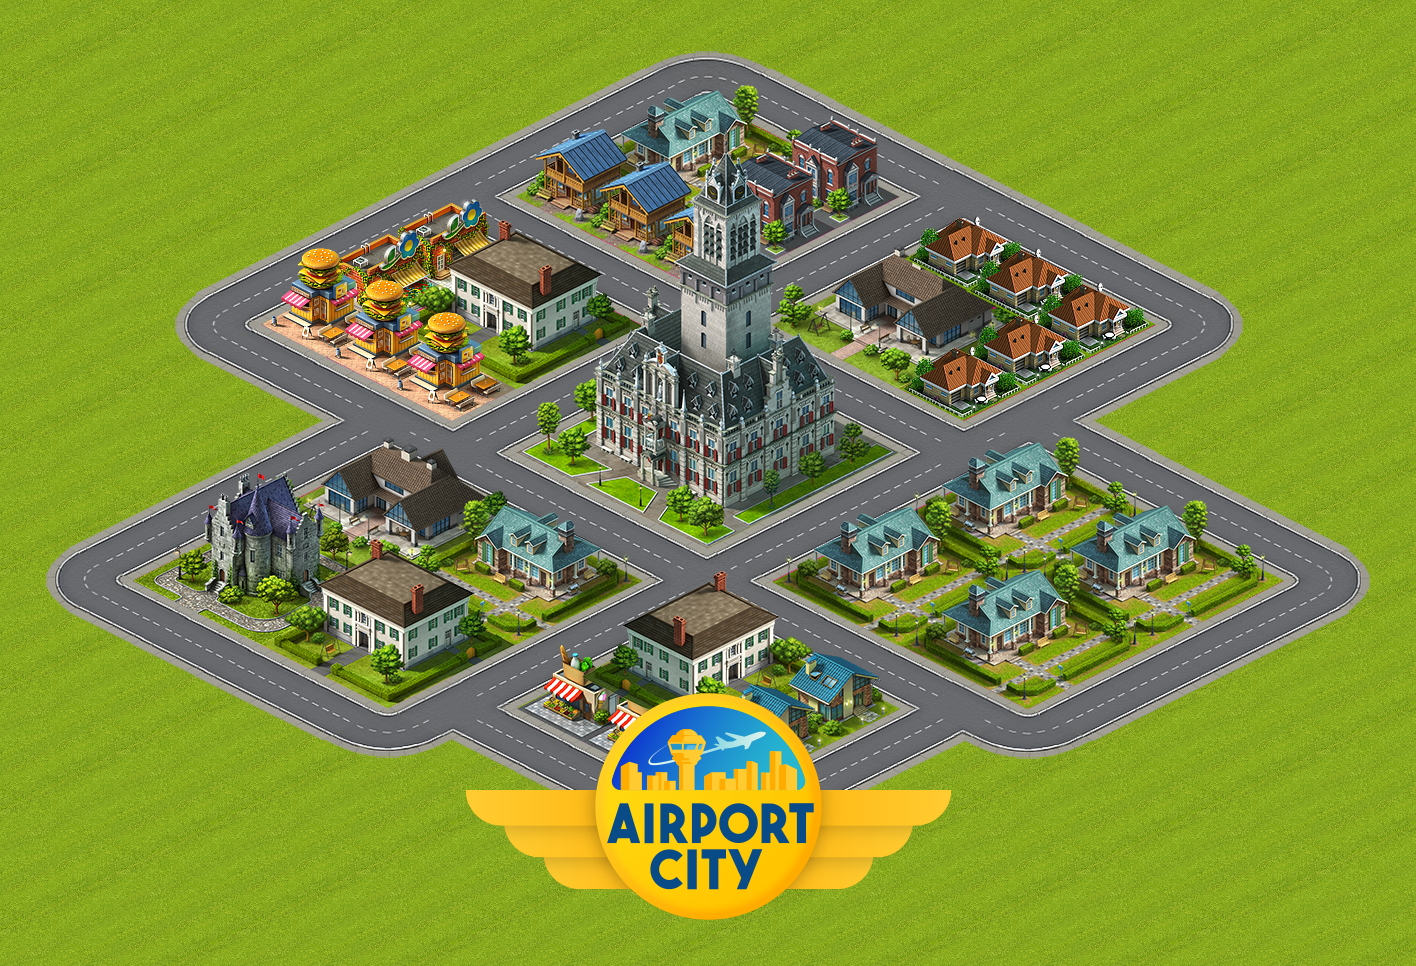 AirportCity_TownHall_Level5.png